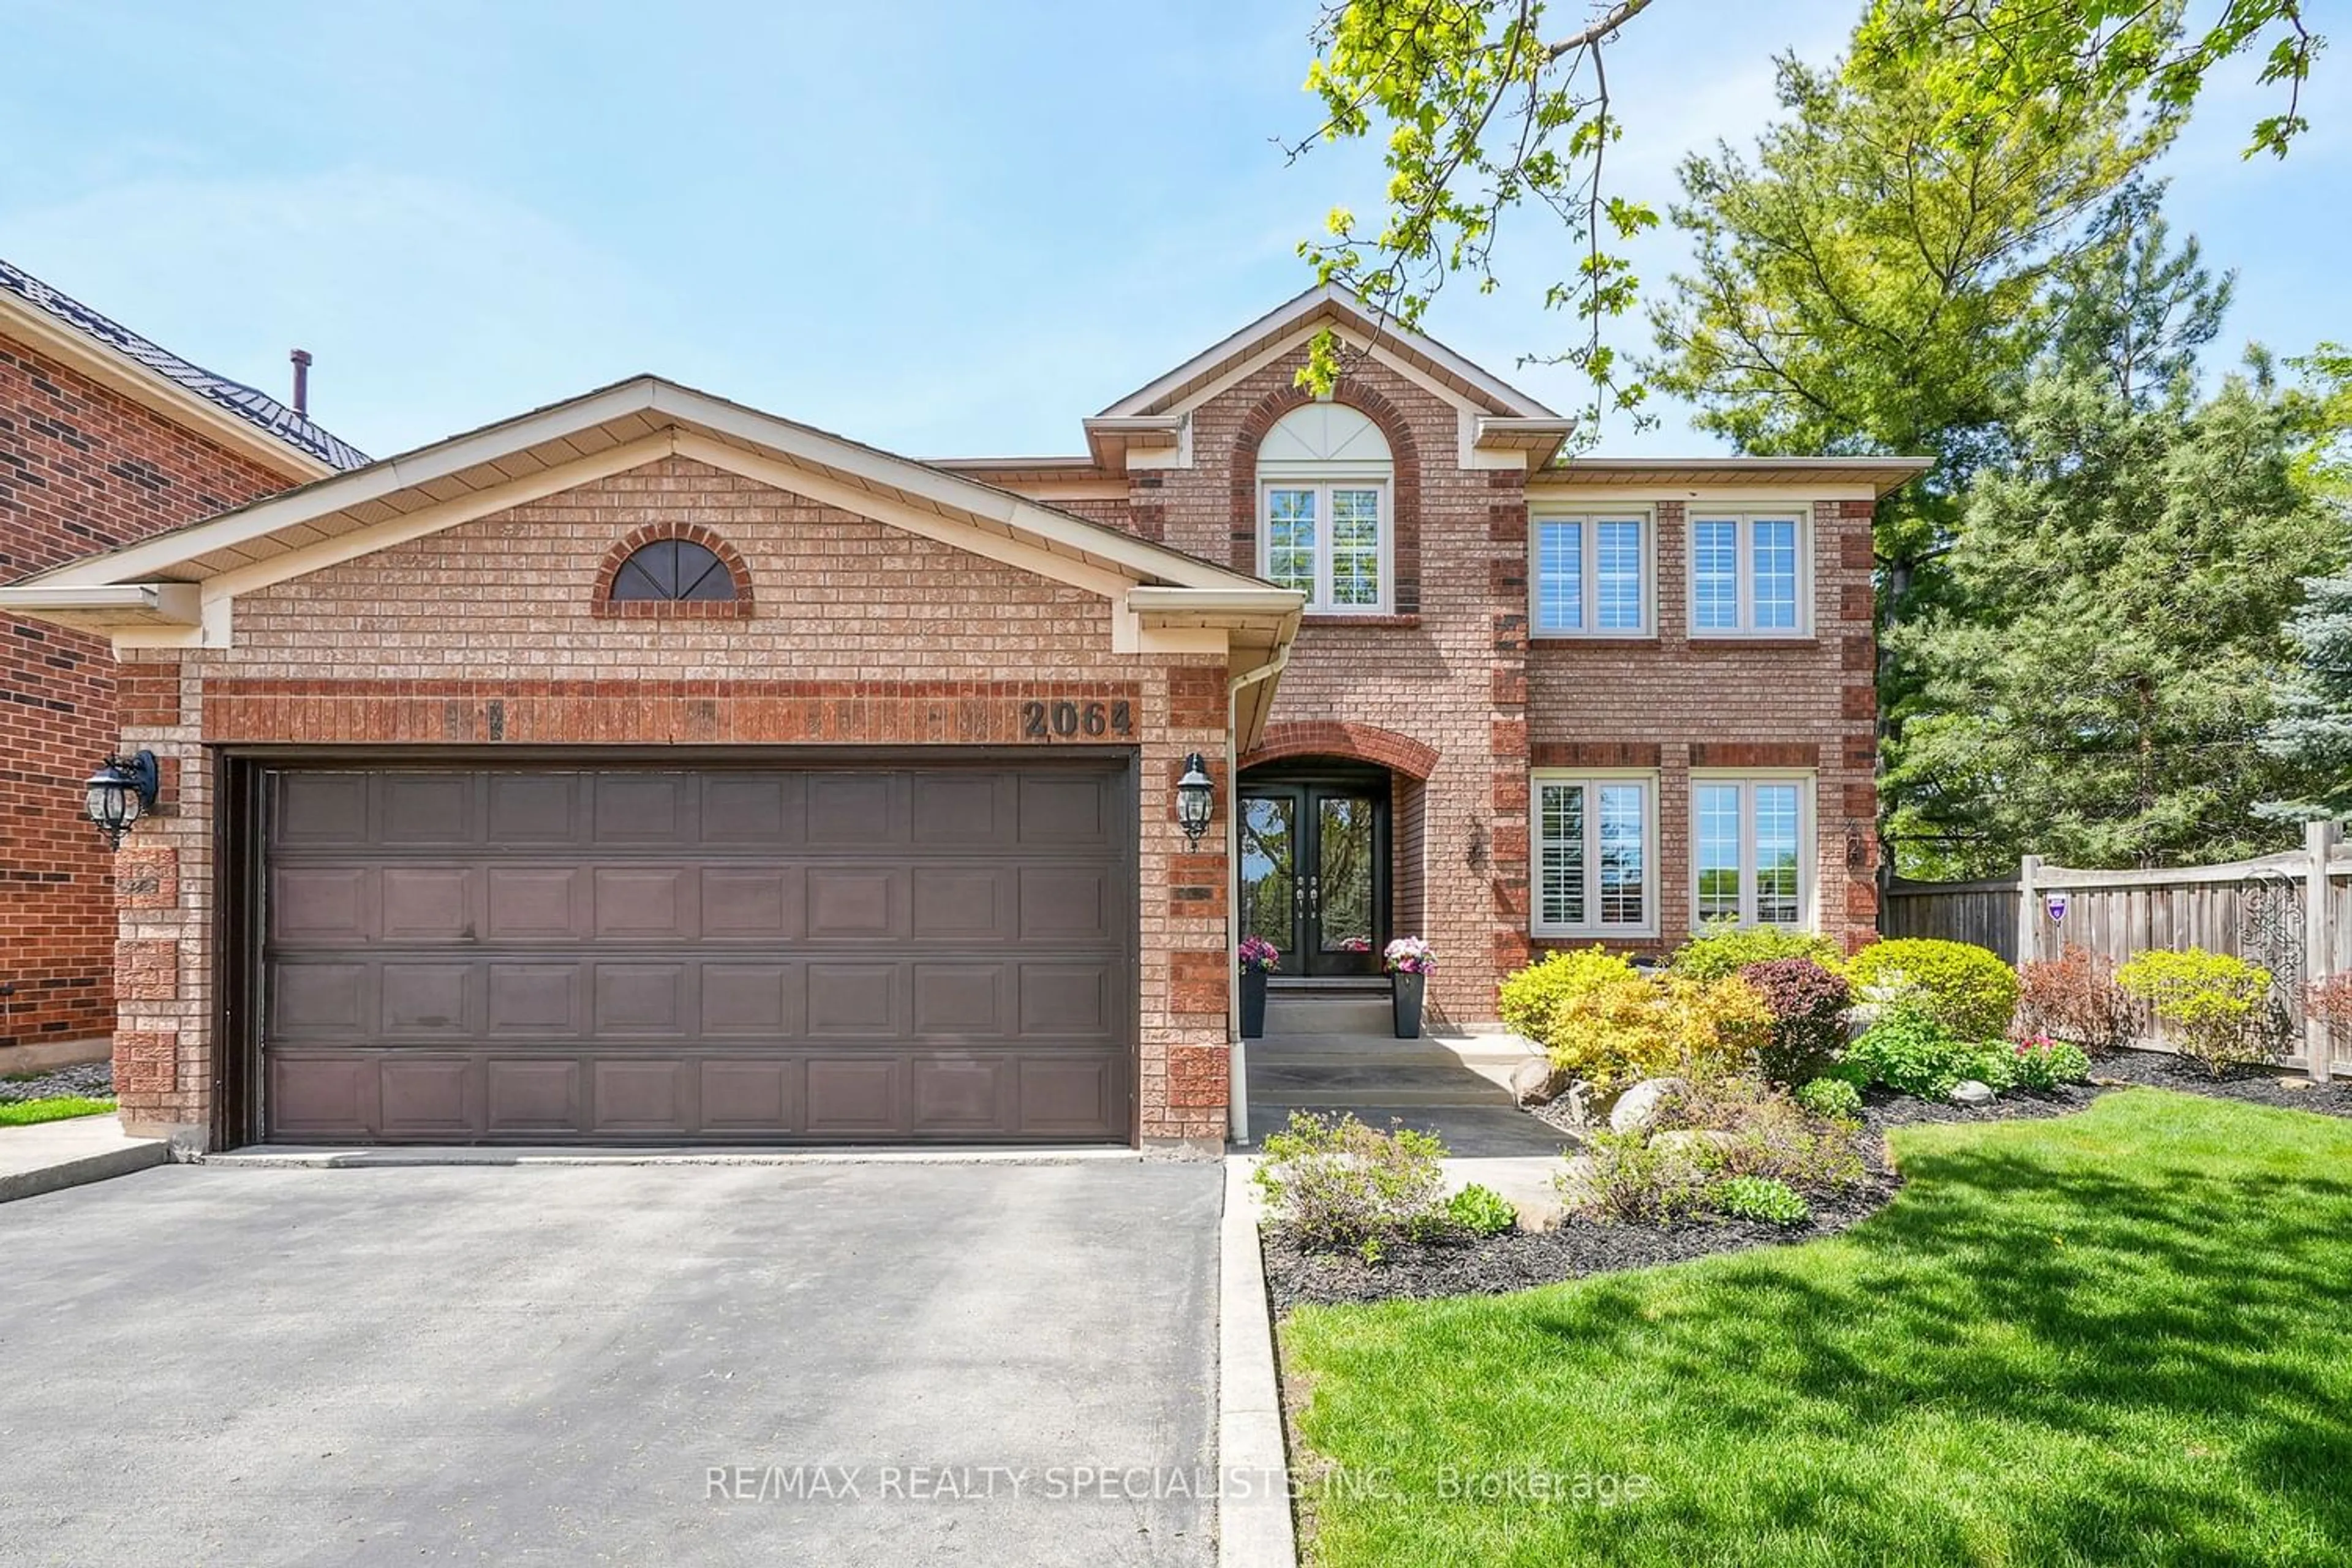 Home with brick exterior material for 2064 Schoolmaster Circ, Oakville Ontario L6M 3A1